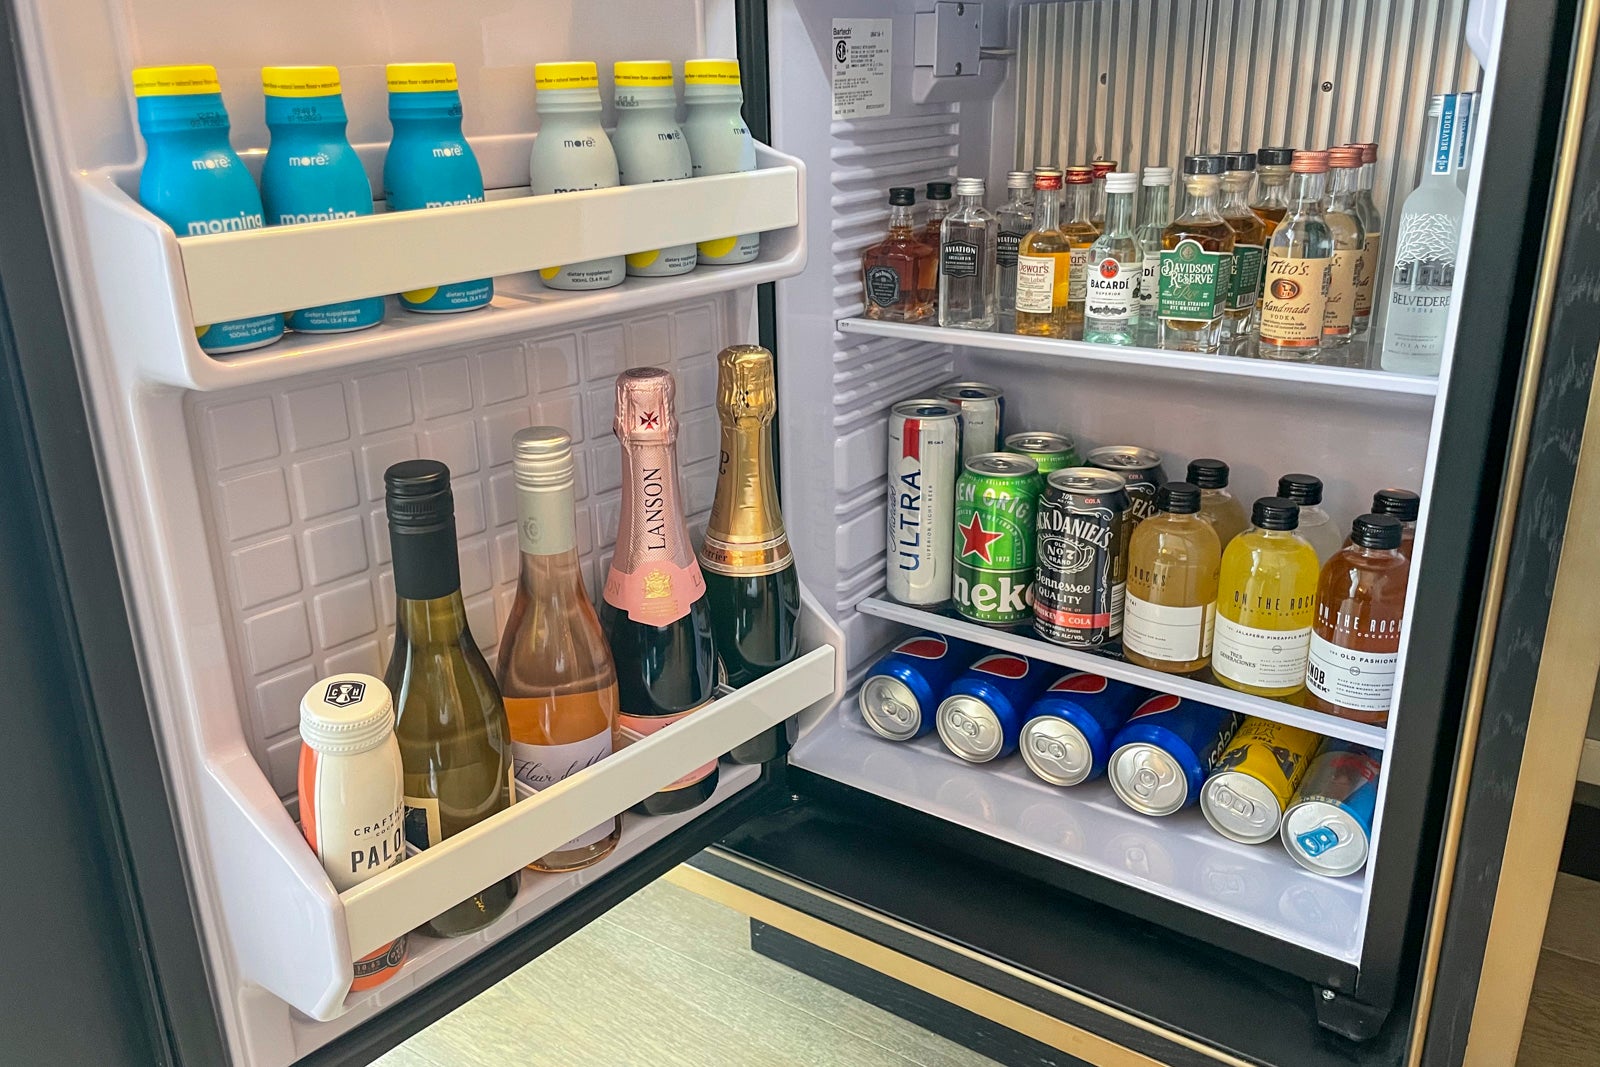 Hotels with awesome free minibars - The Points Guy